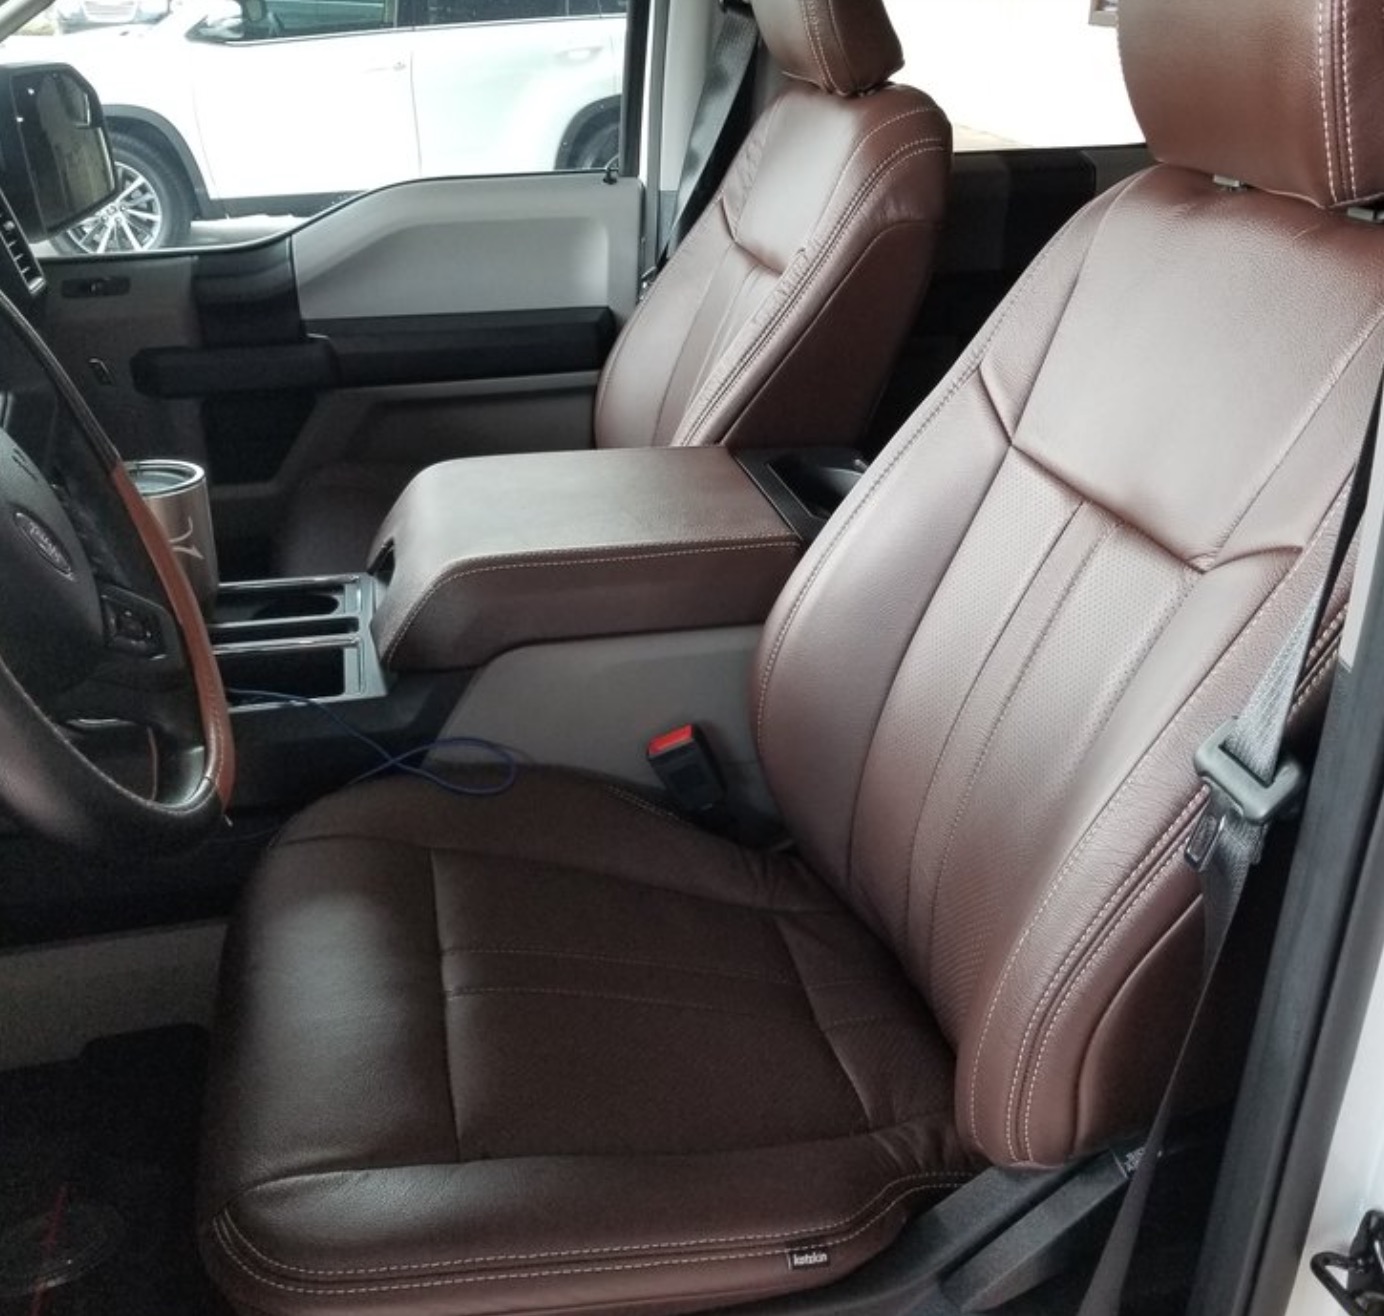 Ford Bronco Having trouble deciding which aftermarket leather color 1638284963467